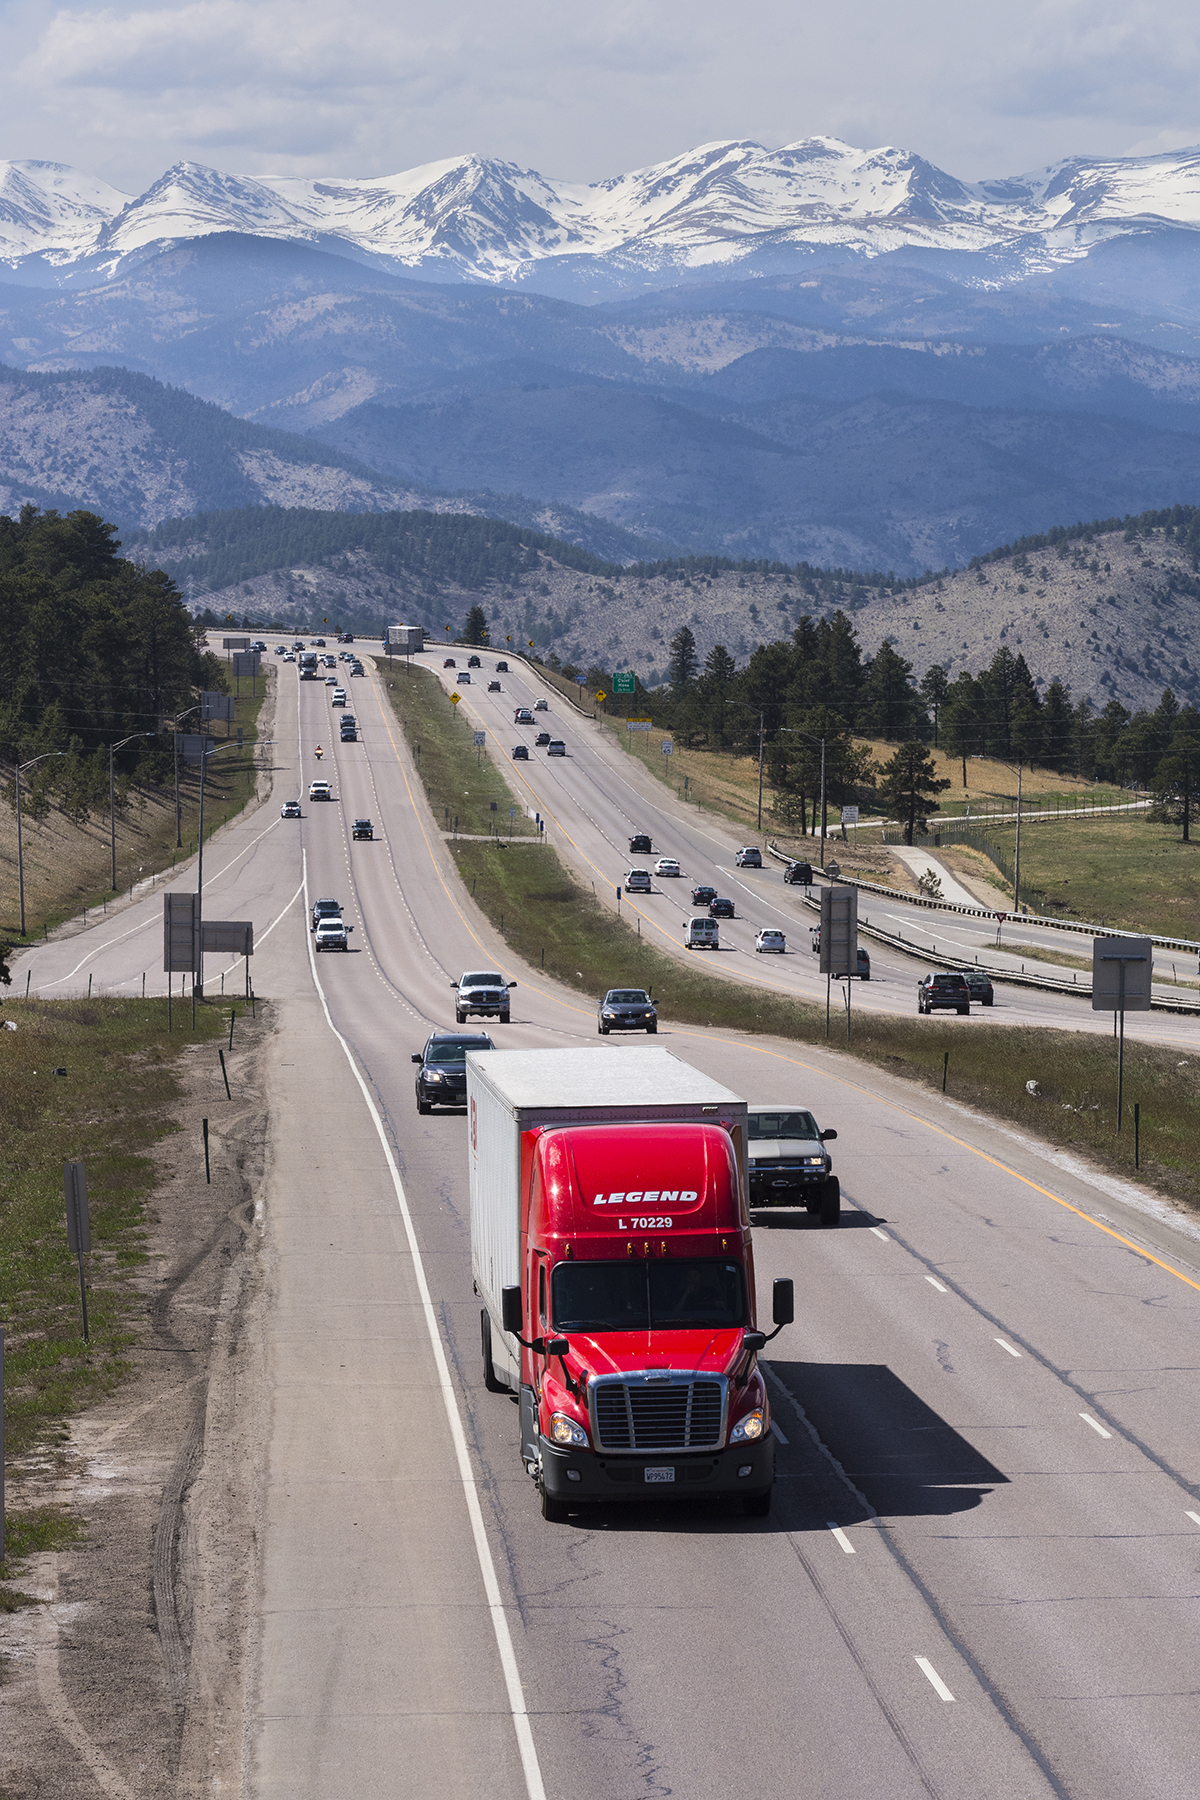 CO 160 Truck on I-70 at Genessee _1224_72C2202lr6 small.jpg detail image